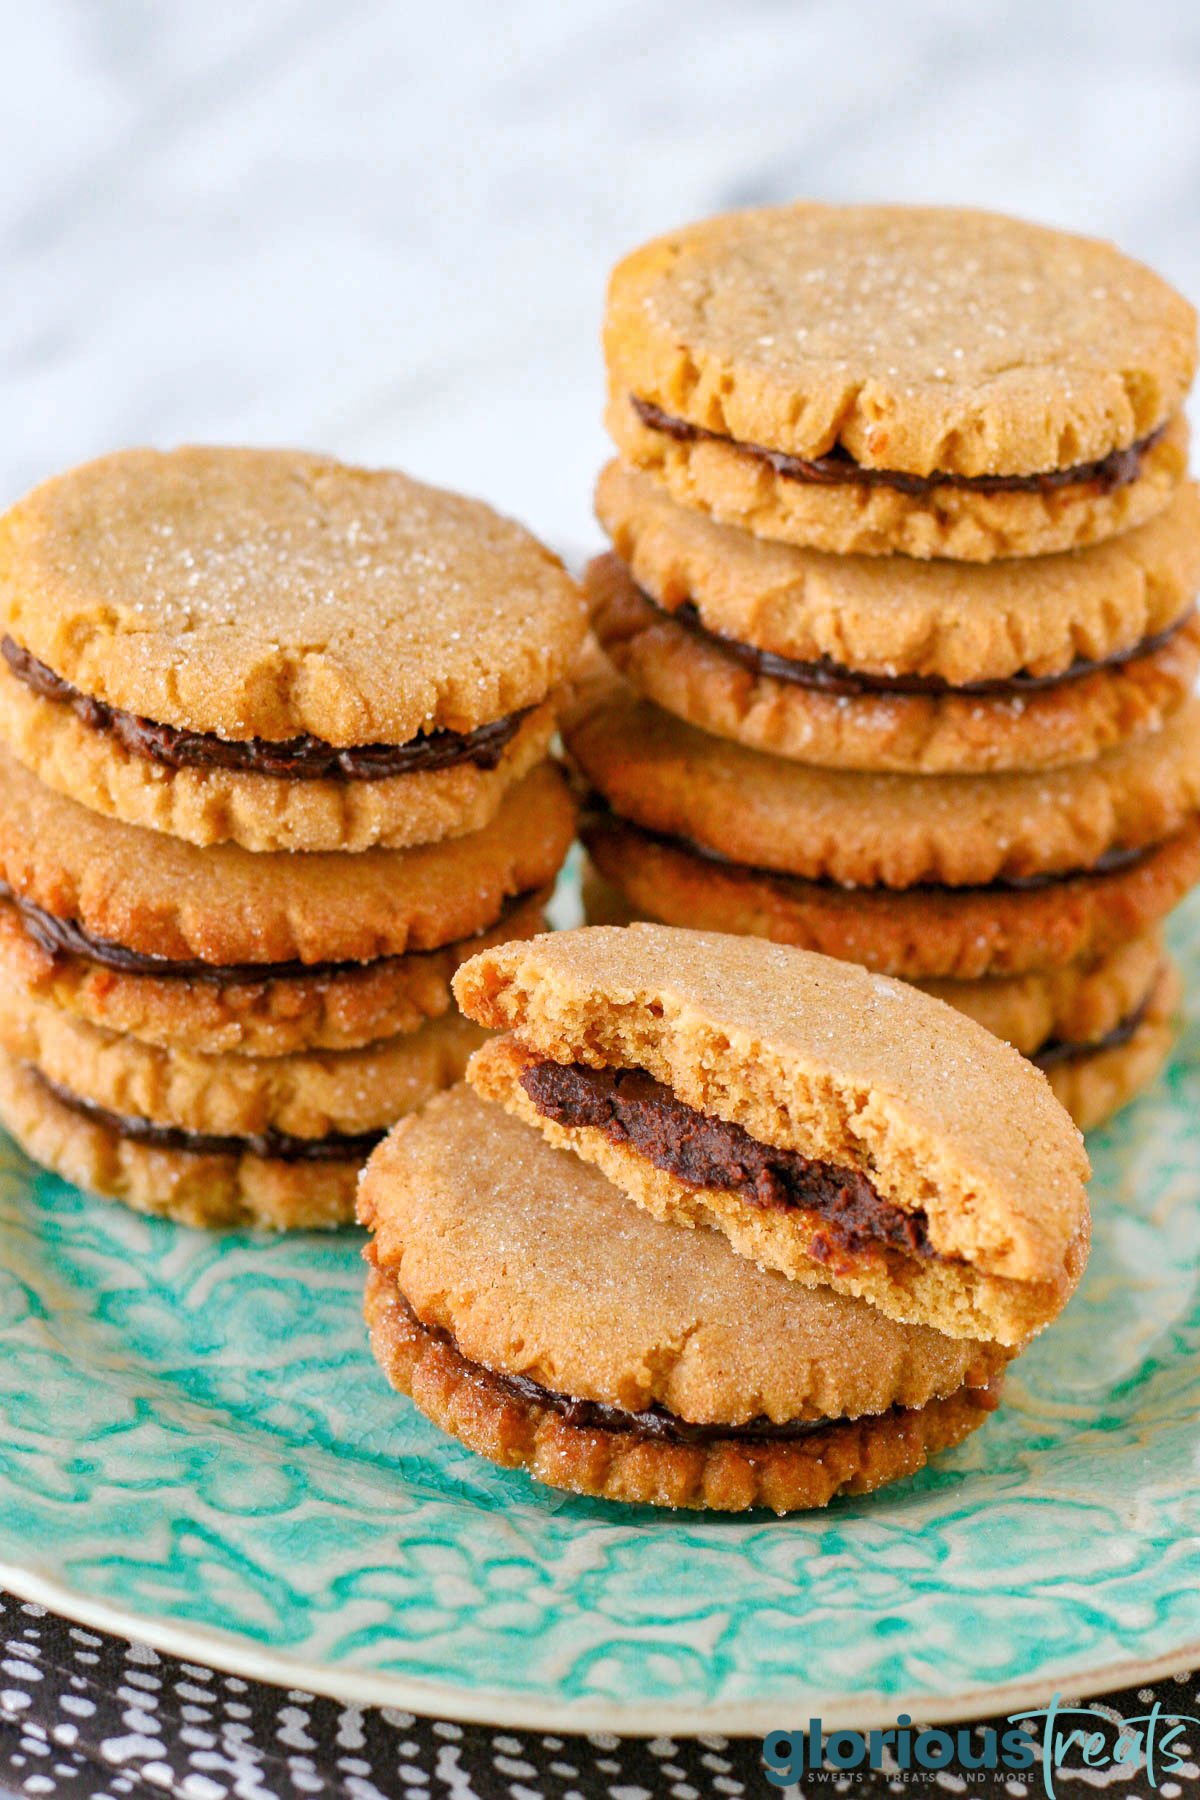 stacks of peanut butter cookies with chocolate filling. front stack's top cookie has been torn in half.